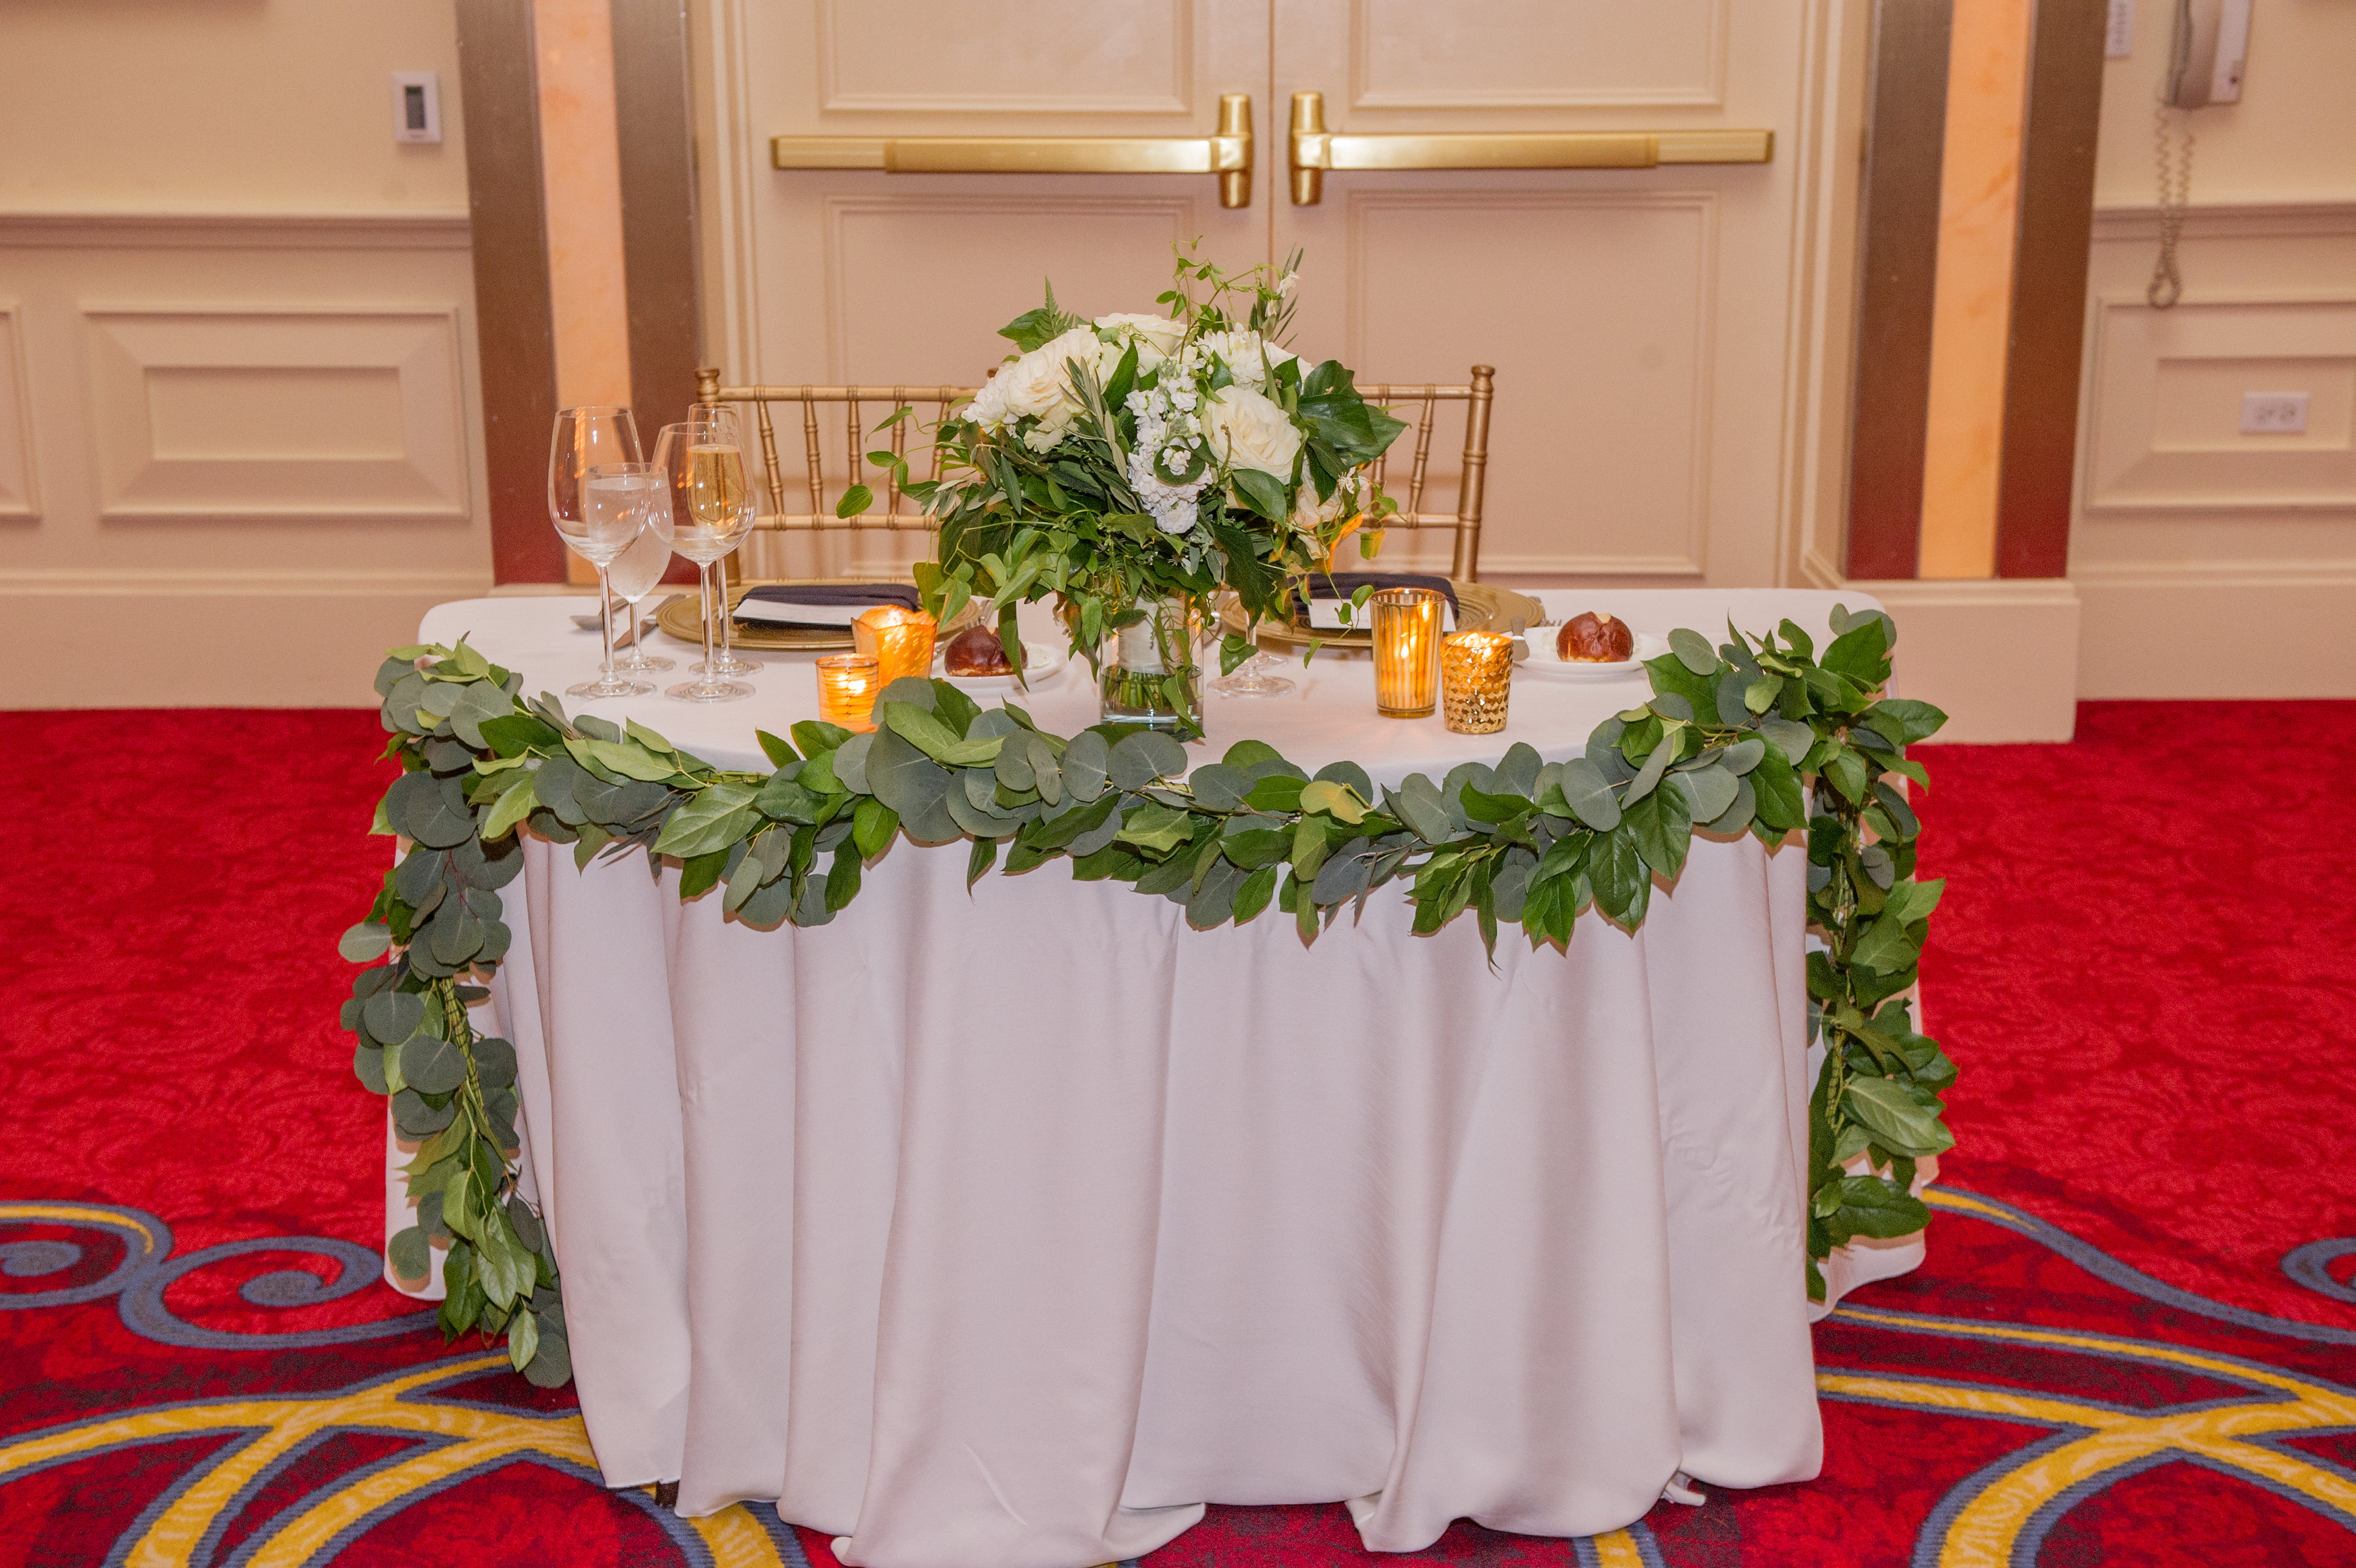 JW Marriott Chicago autumn wedding sweetheart table with ivory and green arrangment.